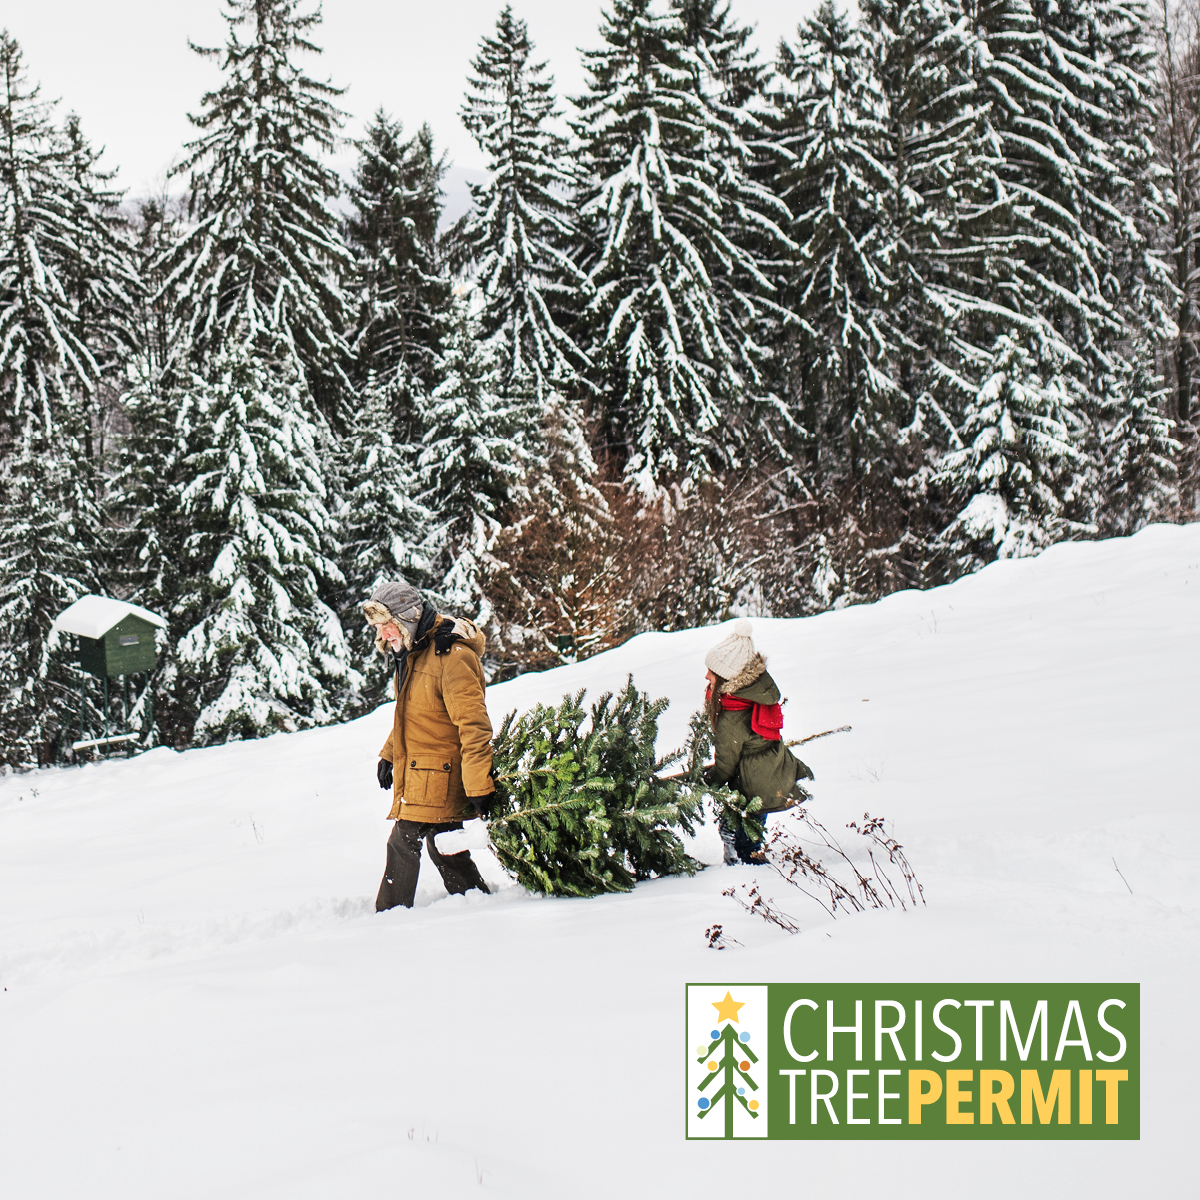 Tahoe National Forest Christmas tree permits available Nov. 7